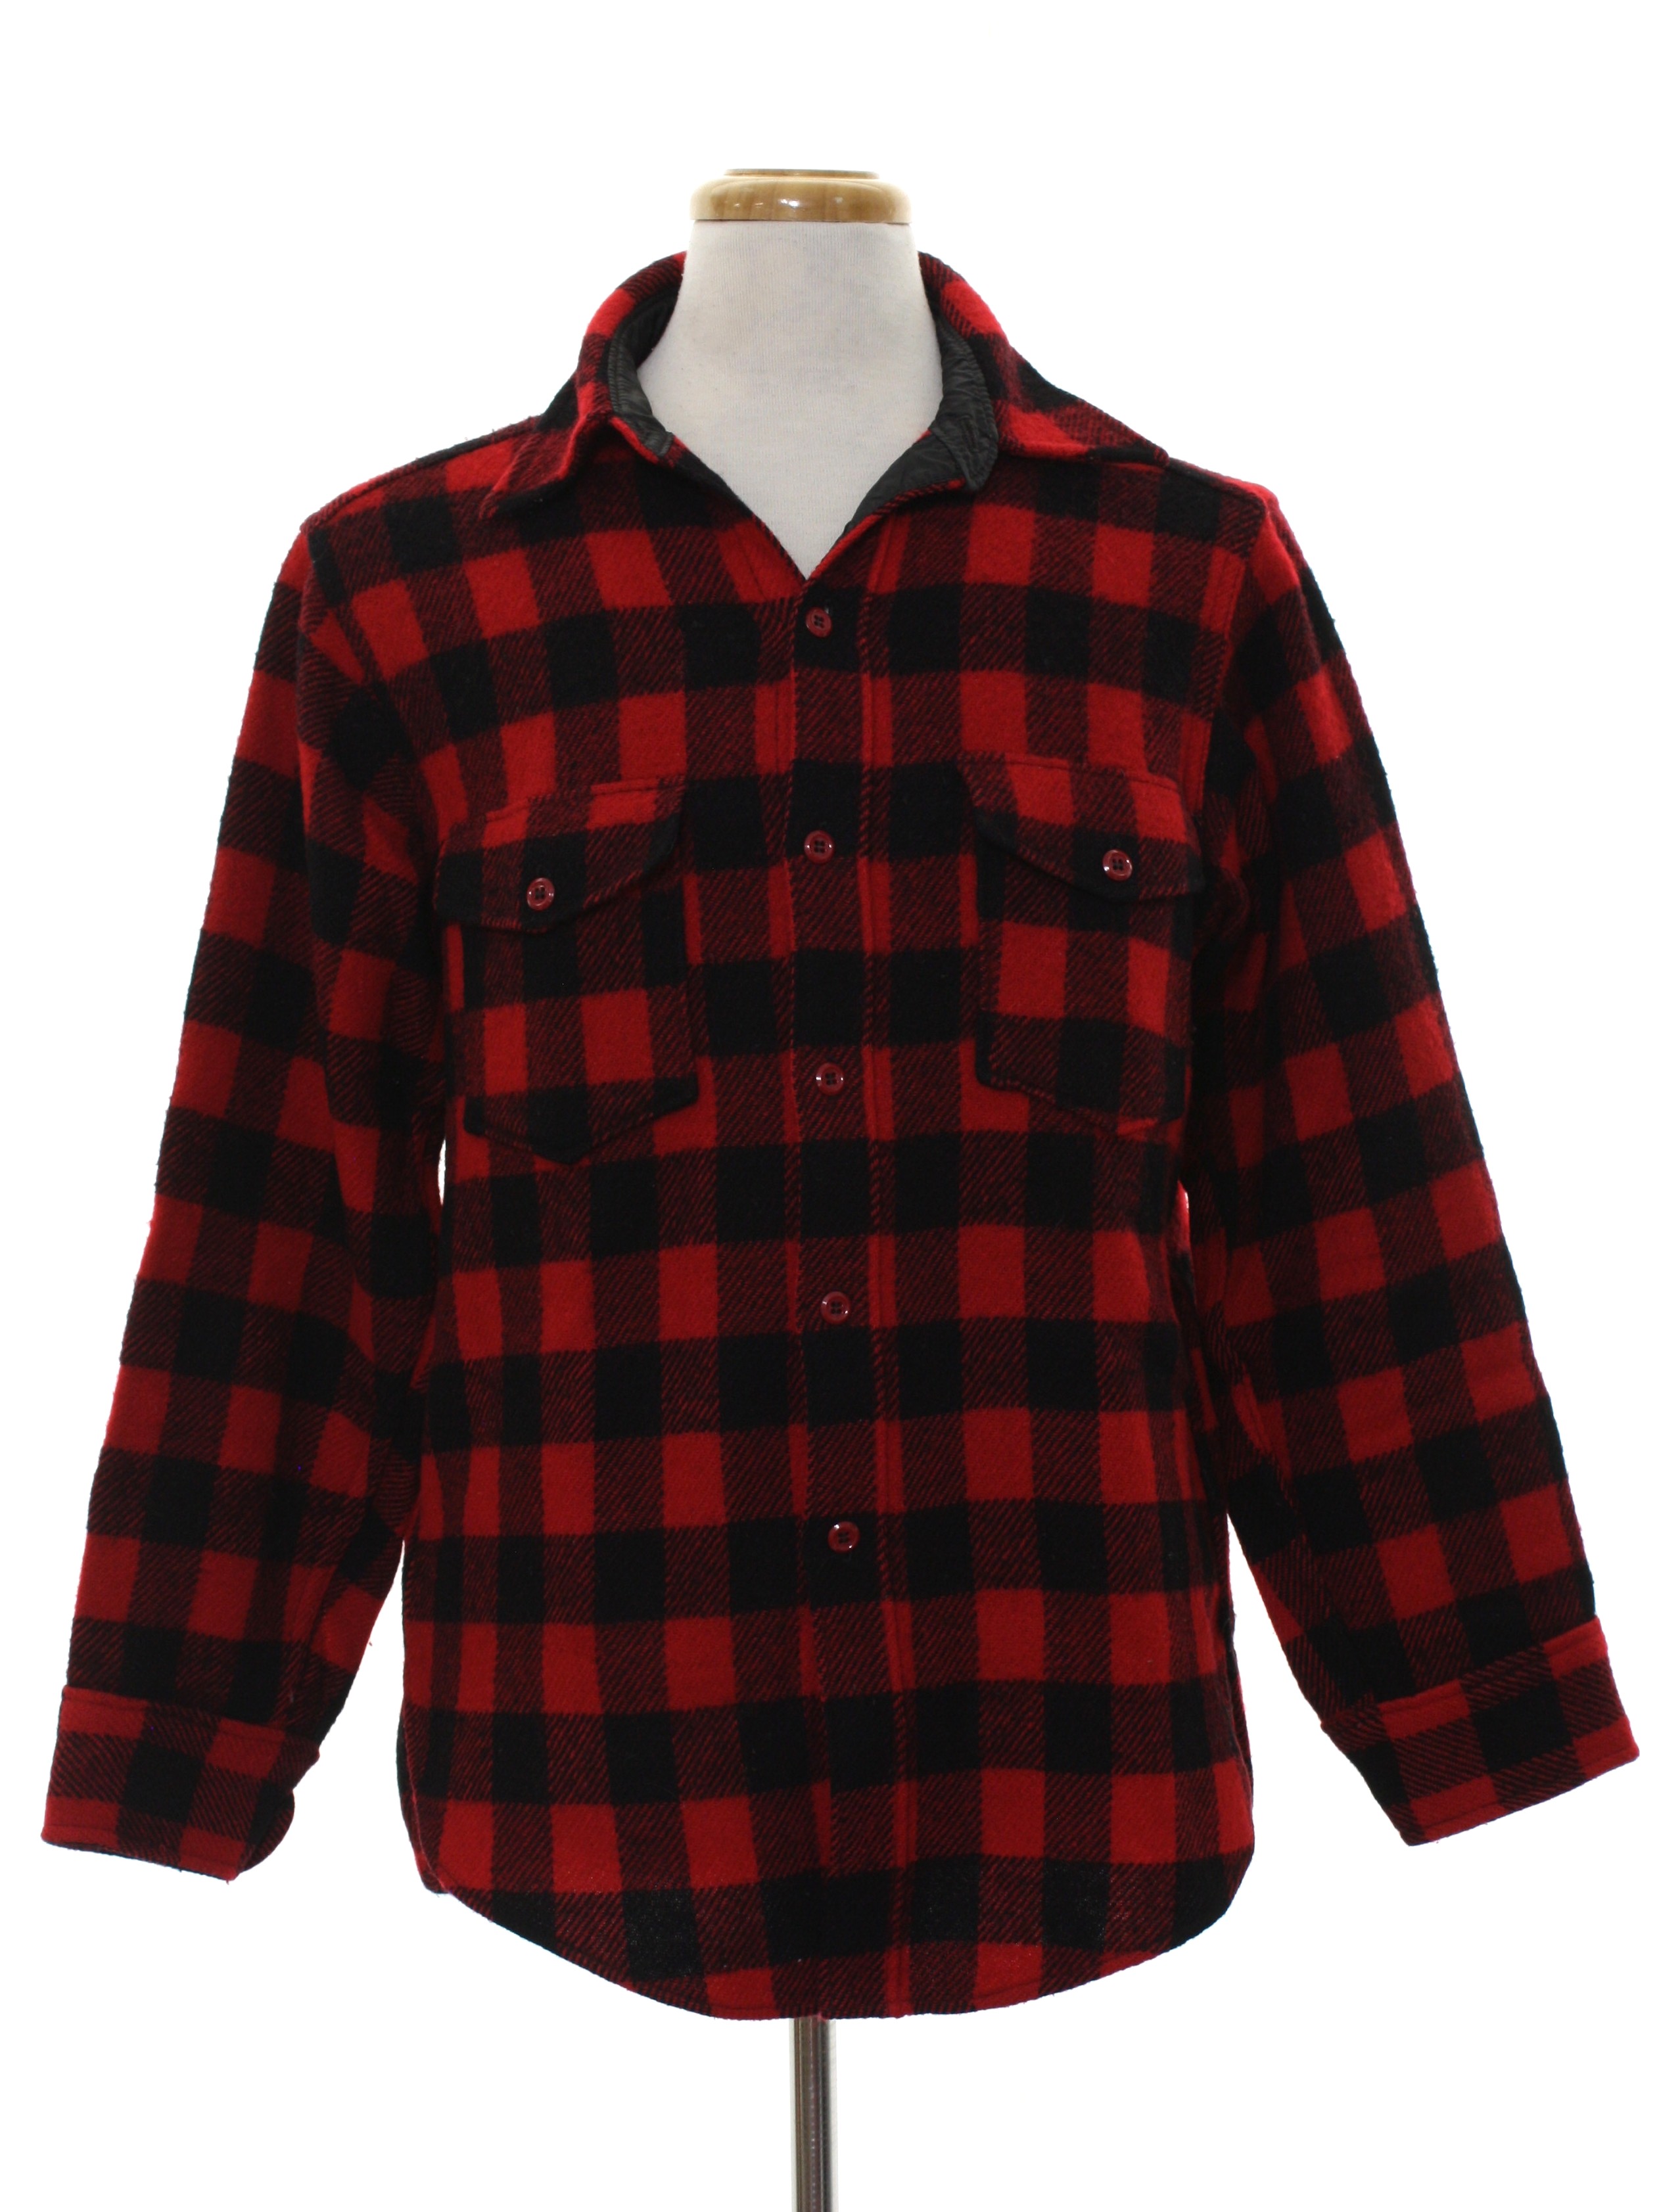 Retro 80s Wool Shirt (Woolrich) : 80s -Woolrich- Mens red and black ...